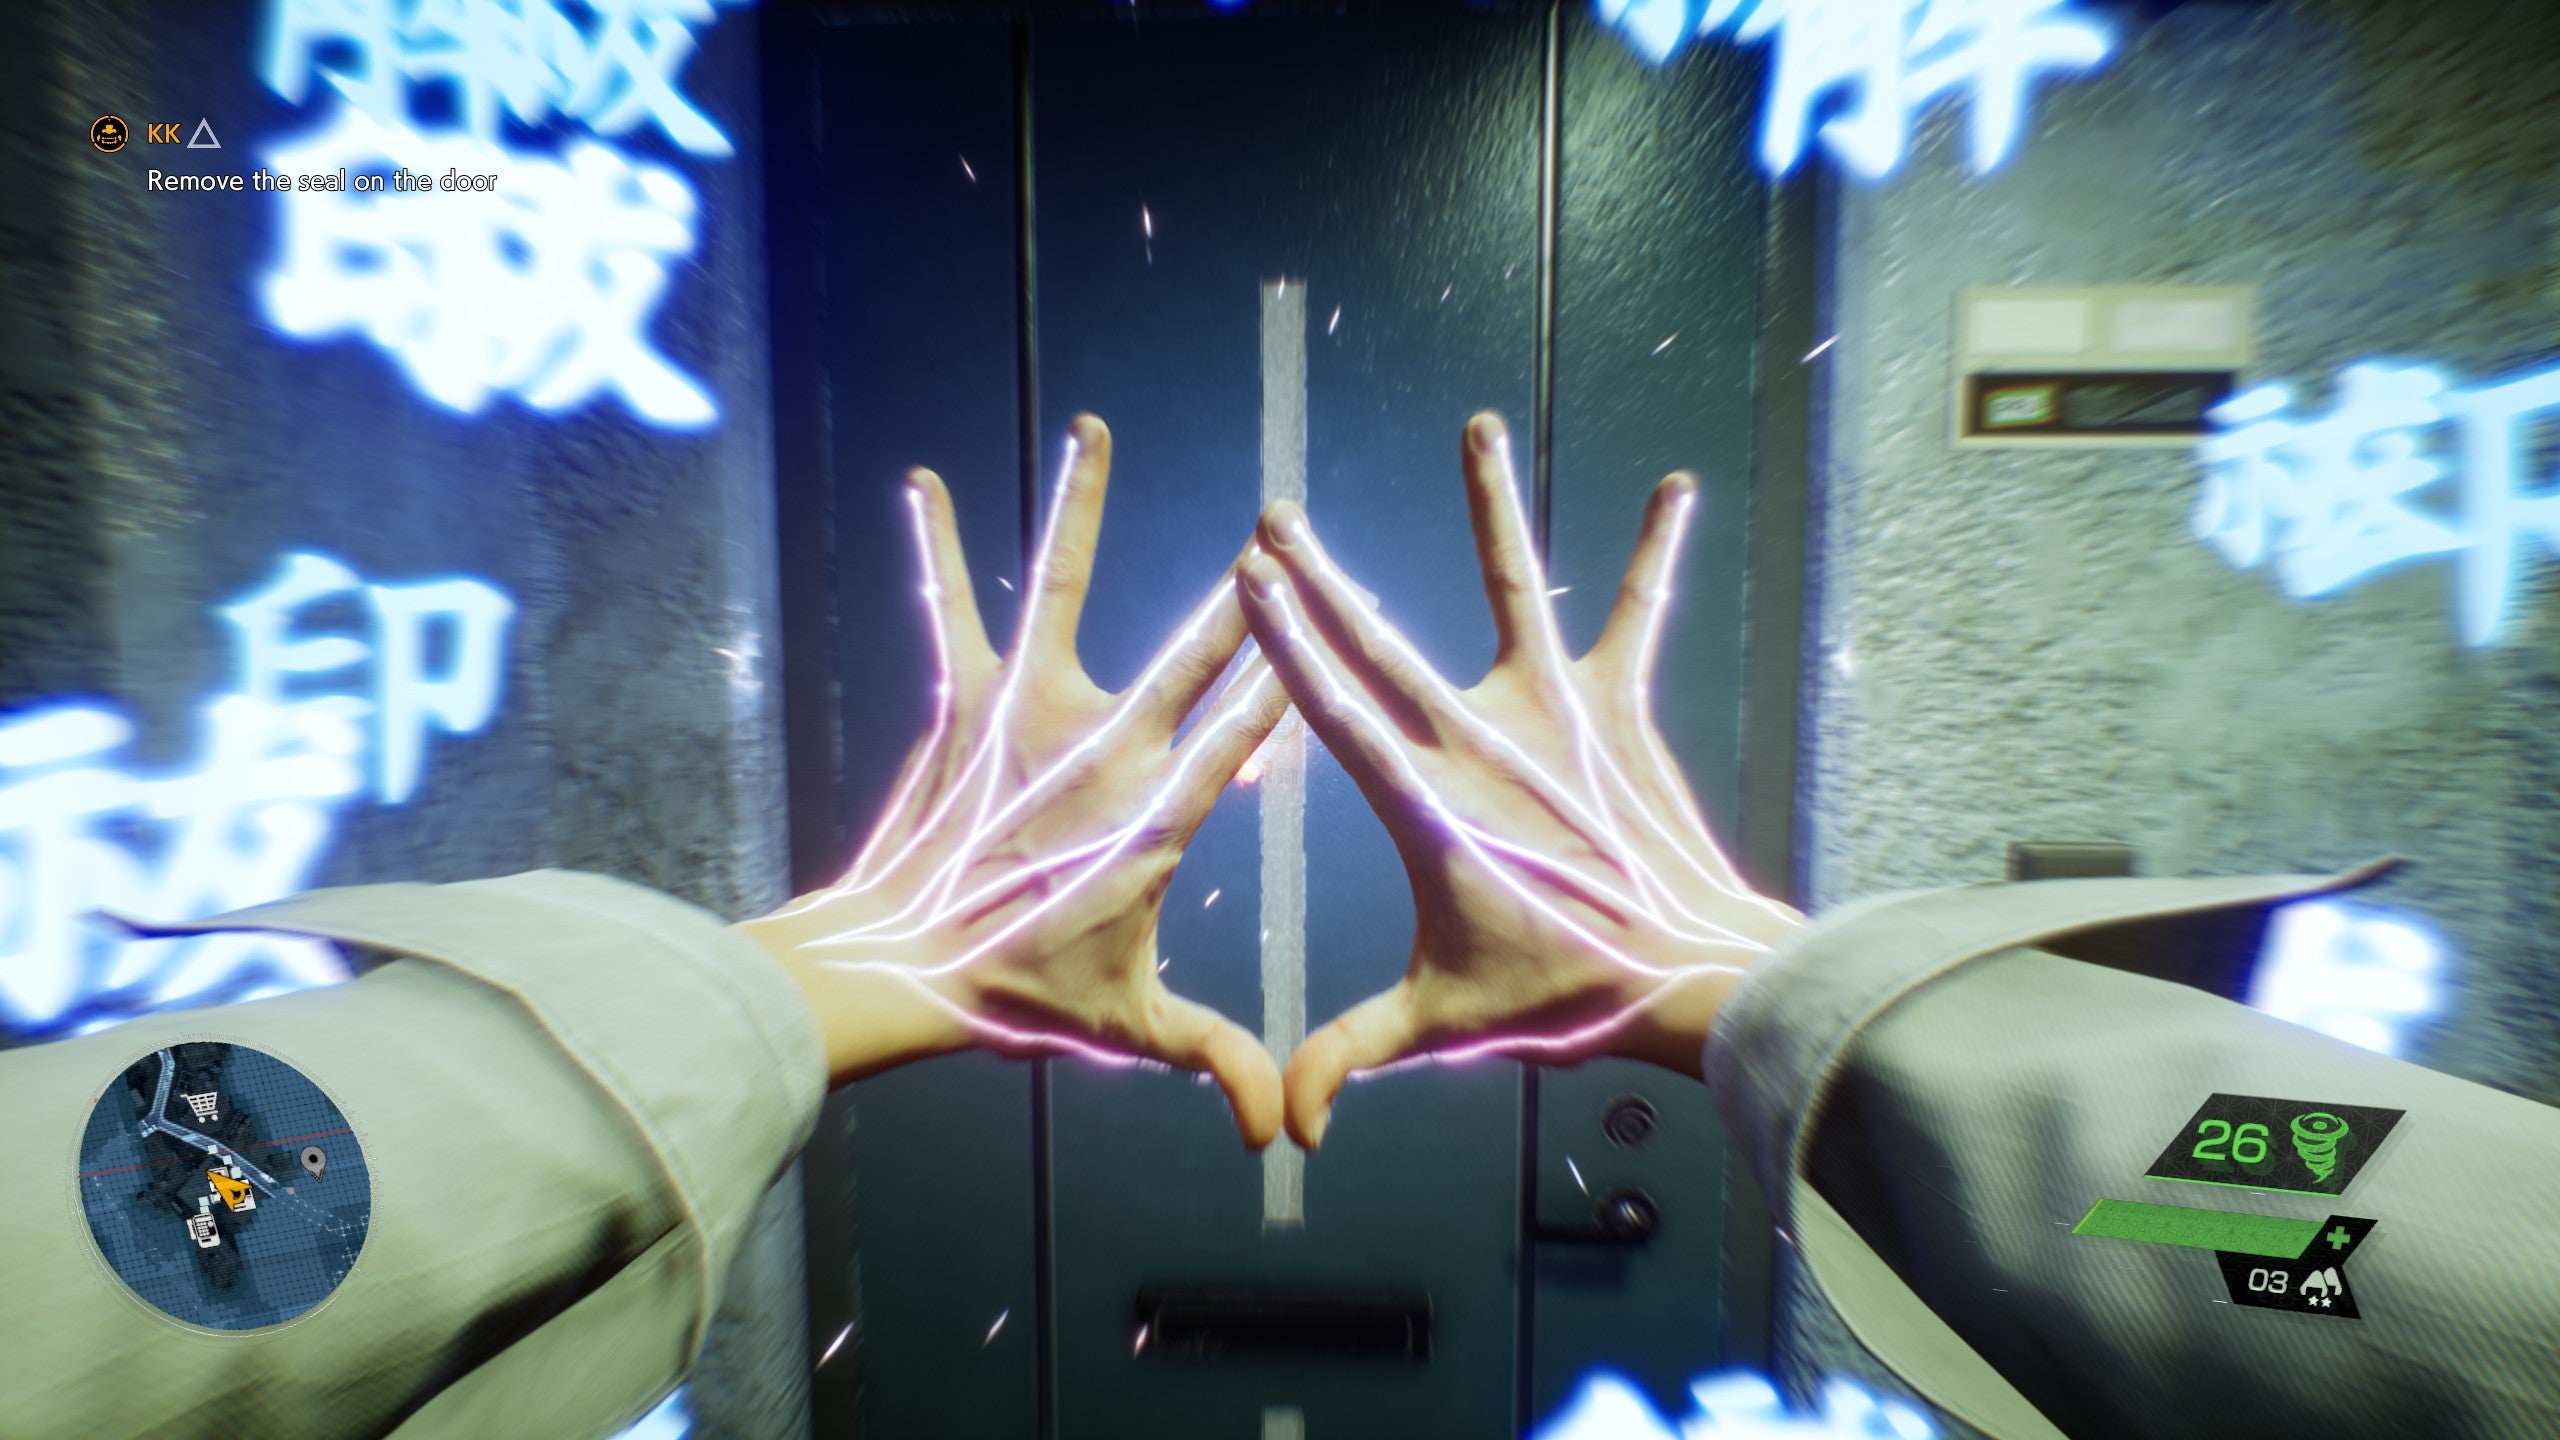 Two hands are thrust out in front of a lift with light-up vein patterns in Ghostwire Tokyo